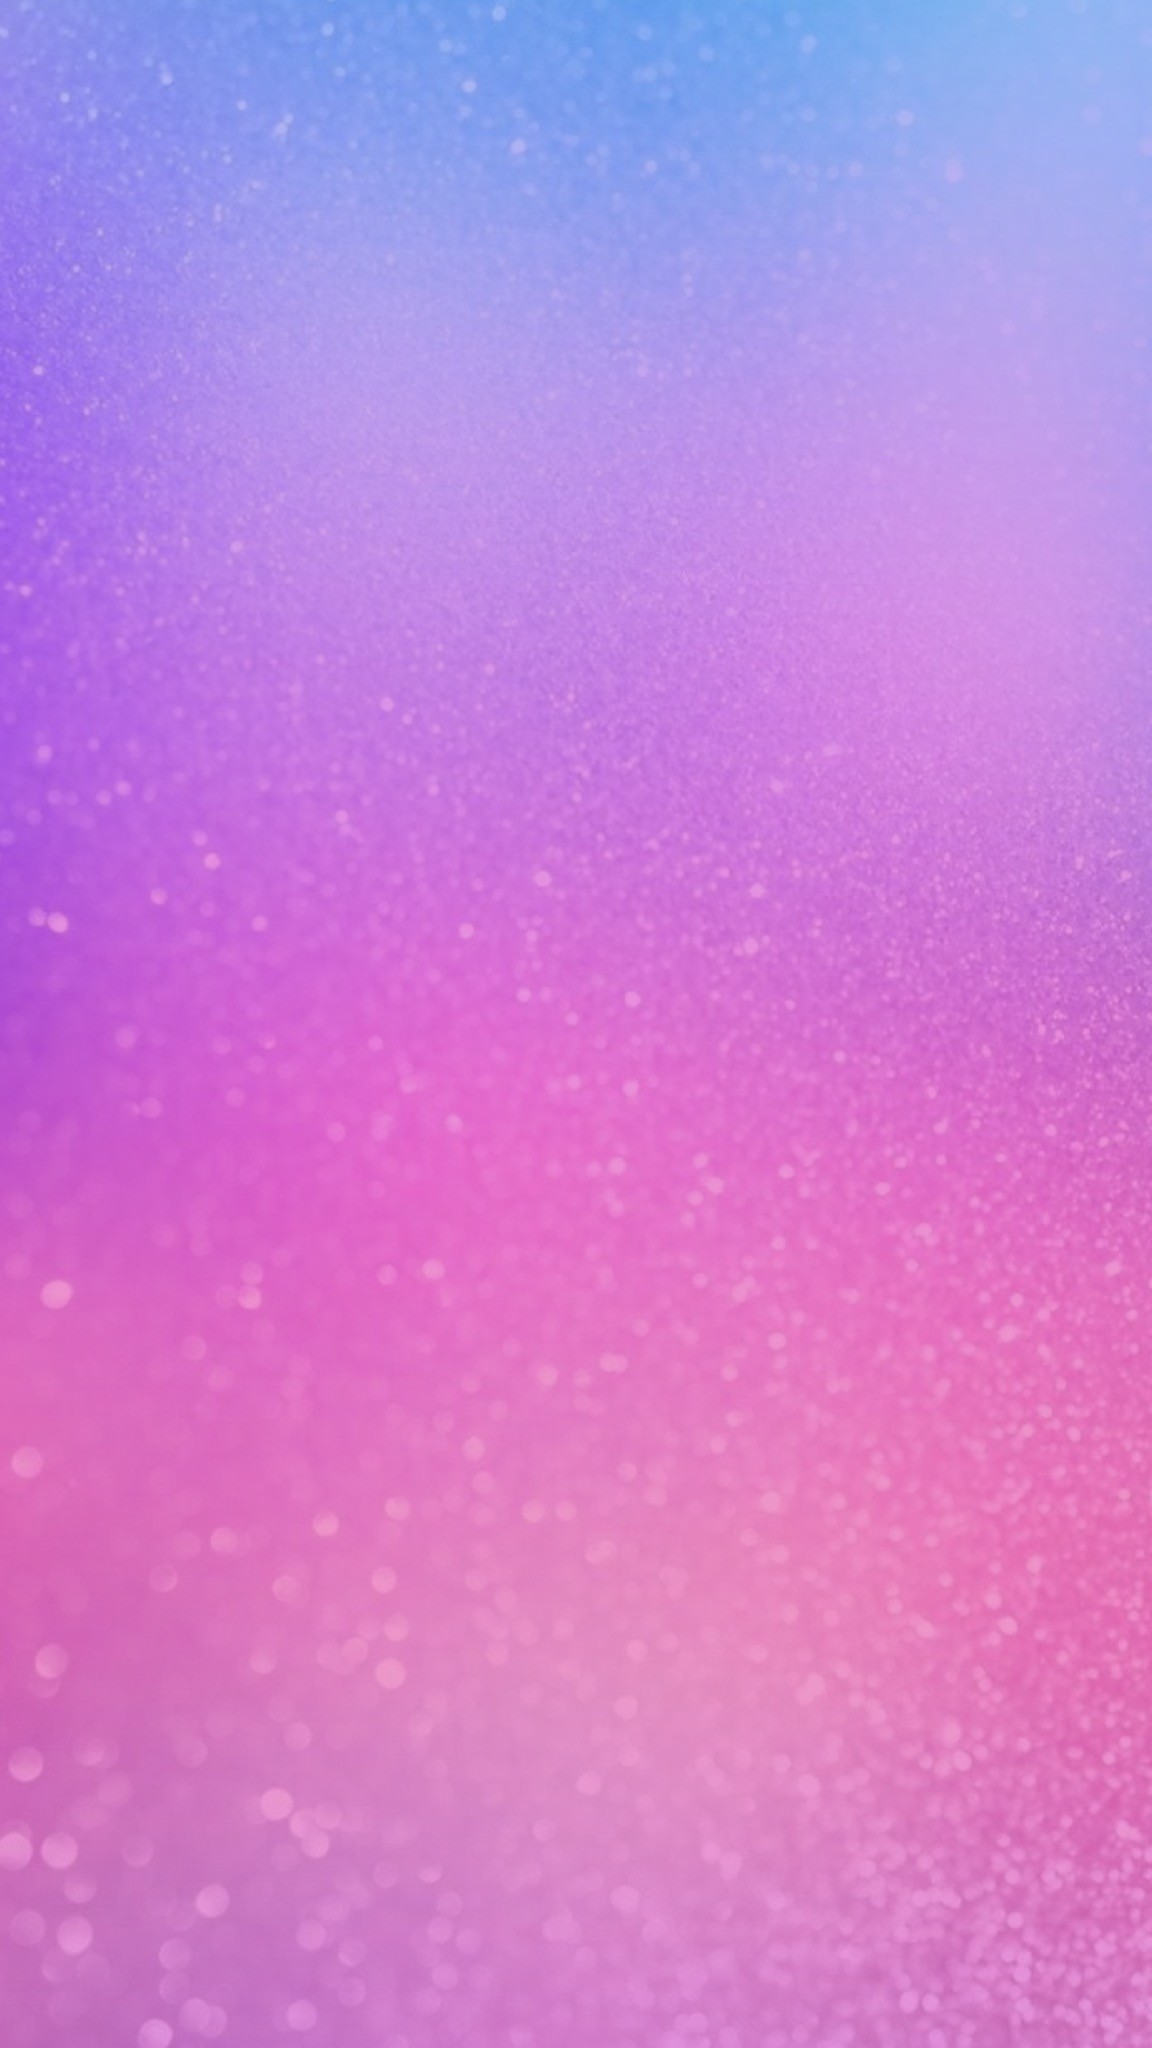 Pink Glitter Phone Wallpaper. Original image not by me I just made the ombr / gradient. Glitter,